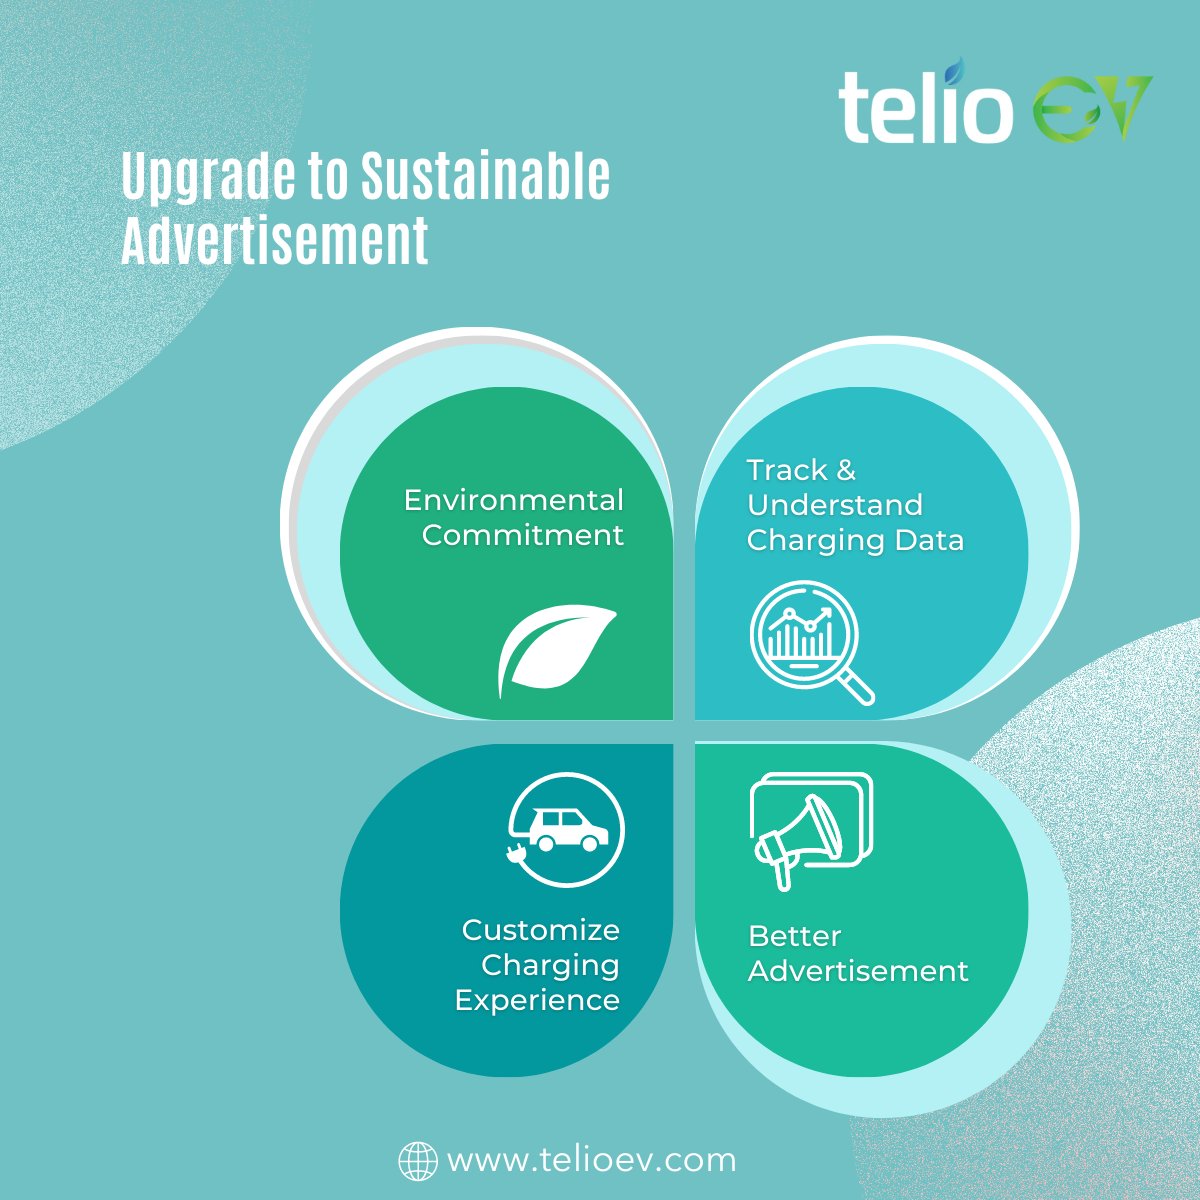 A TelioEV CMS allows you to track and analyze charging data in real-time using which you can customize the charging experience for your customers, including the messaging displayed on the EV charging display. Visit us at telioev.com or write us at support@telioev.com